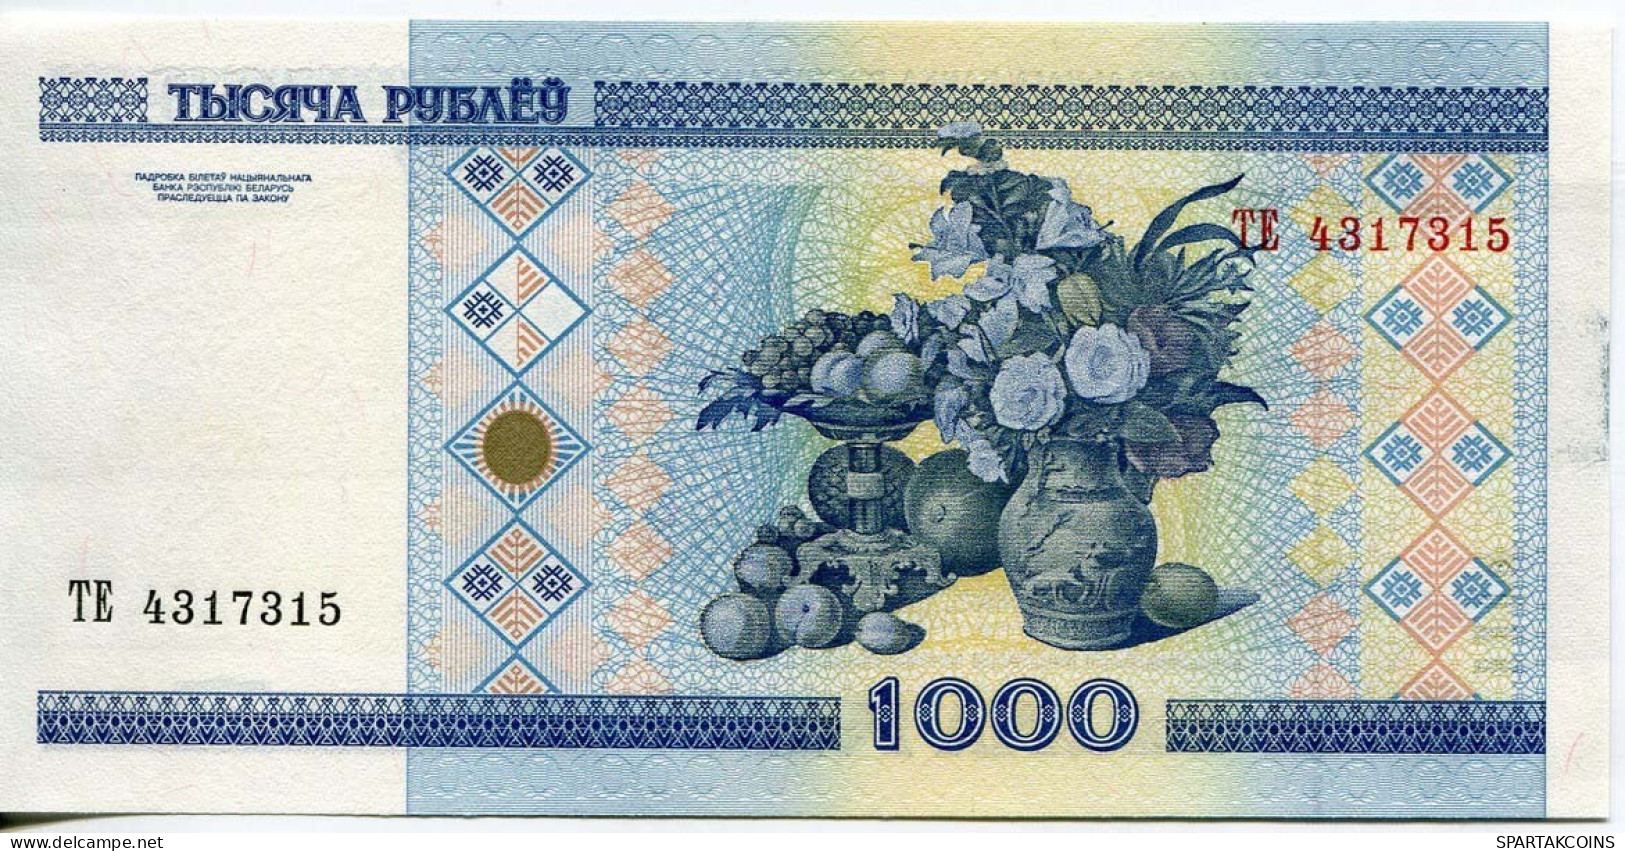 BELARUS 1000 RUBLES 2000 Museum Of Applied Arts Paper Money Banknote #P10204.V - [11] Emissions Locales